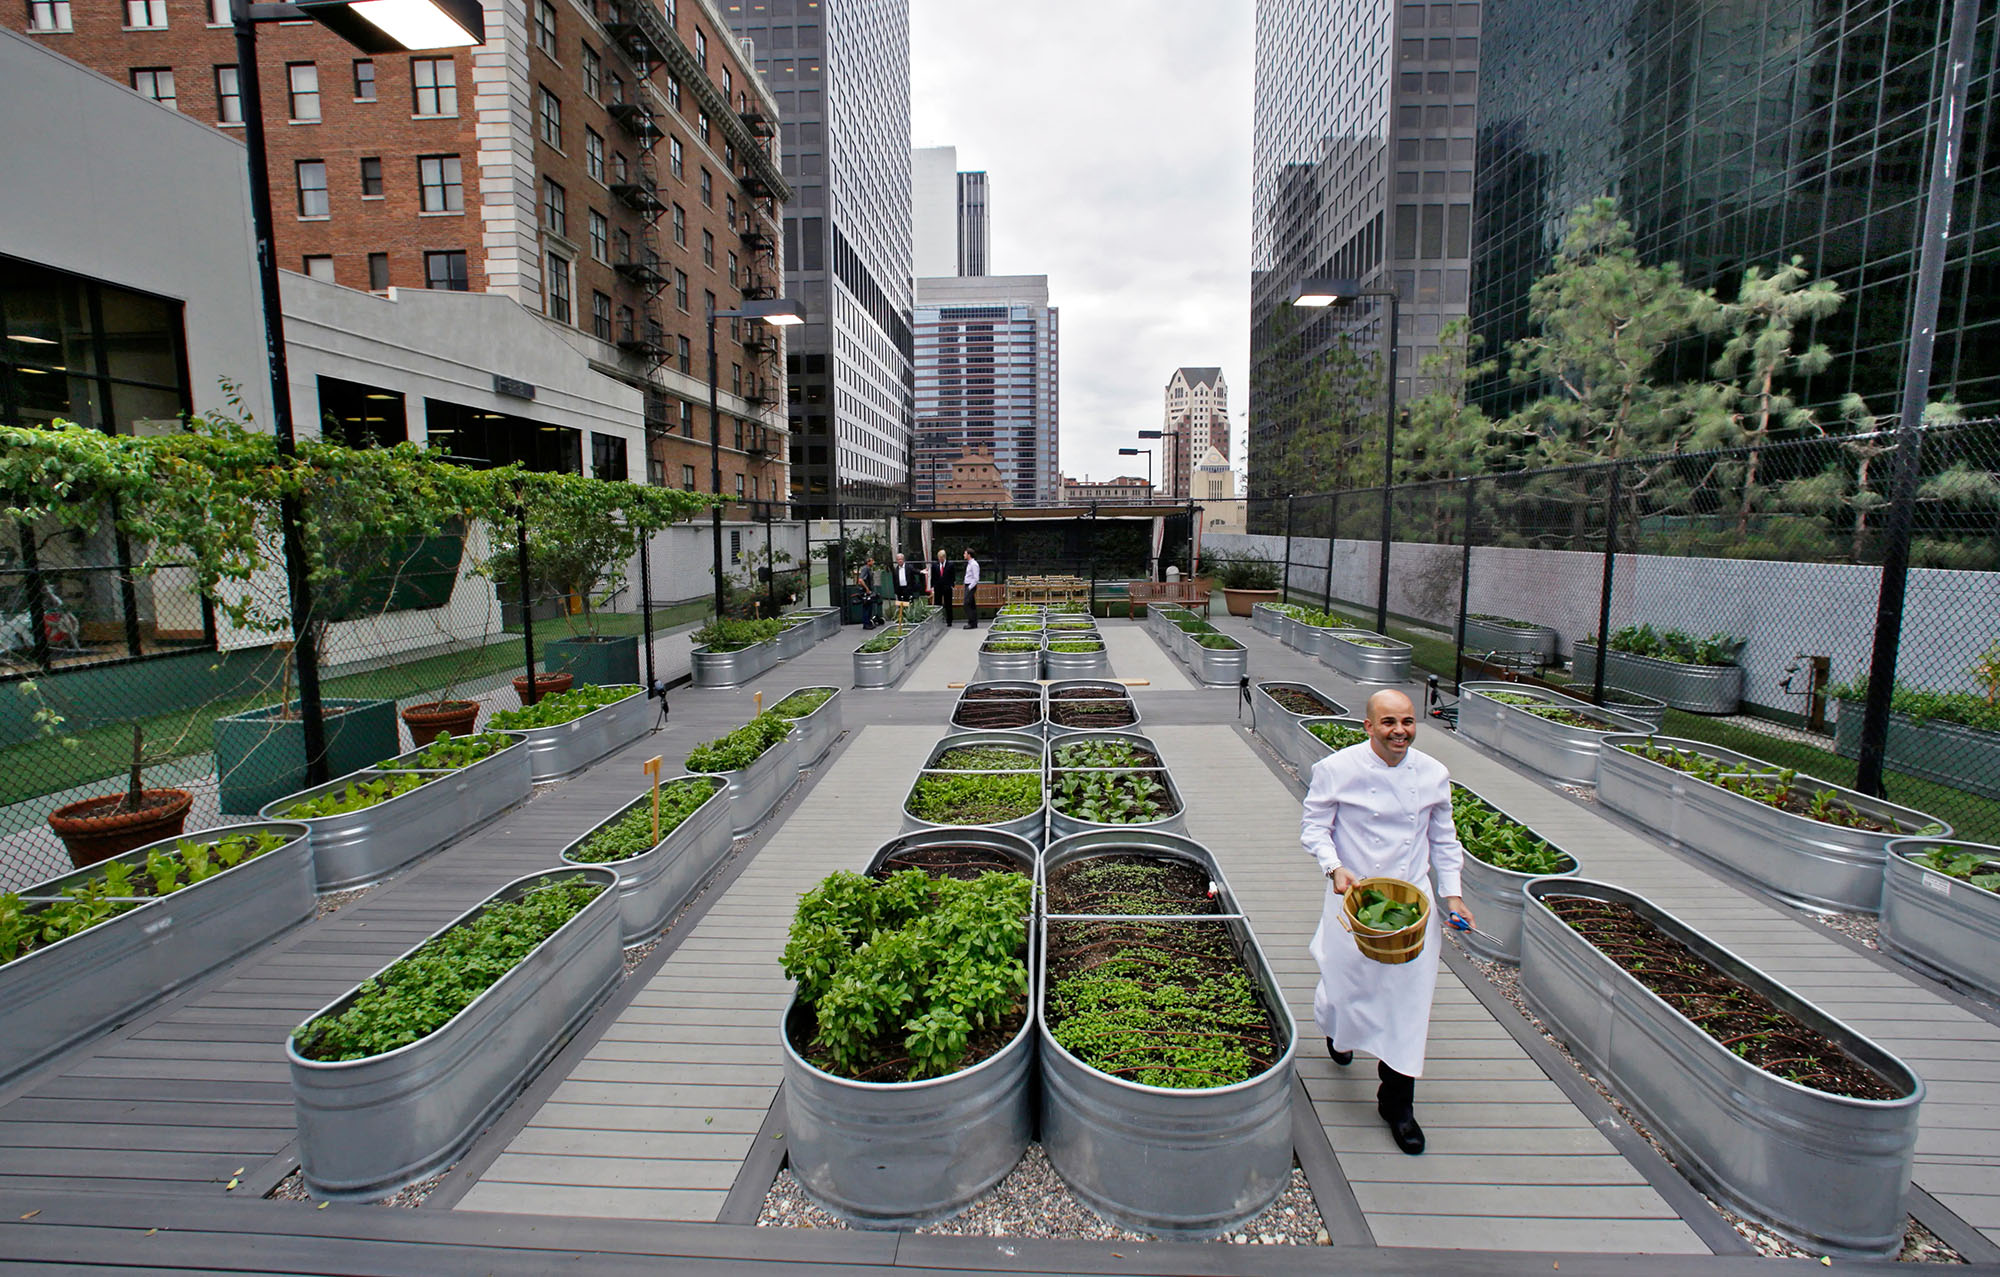 Featured image for “Sustainable Urban Food Management”